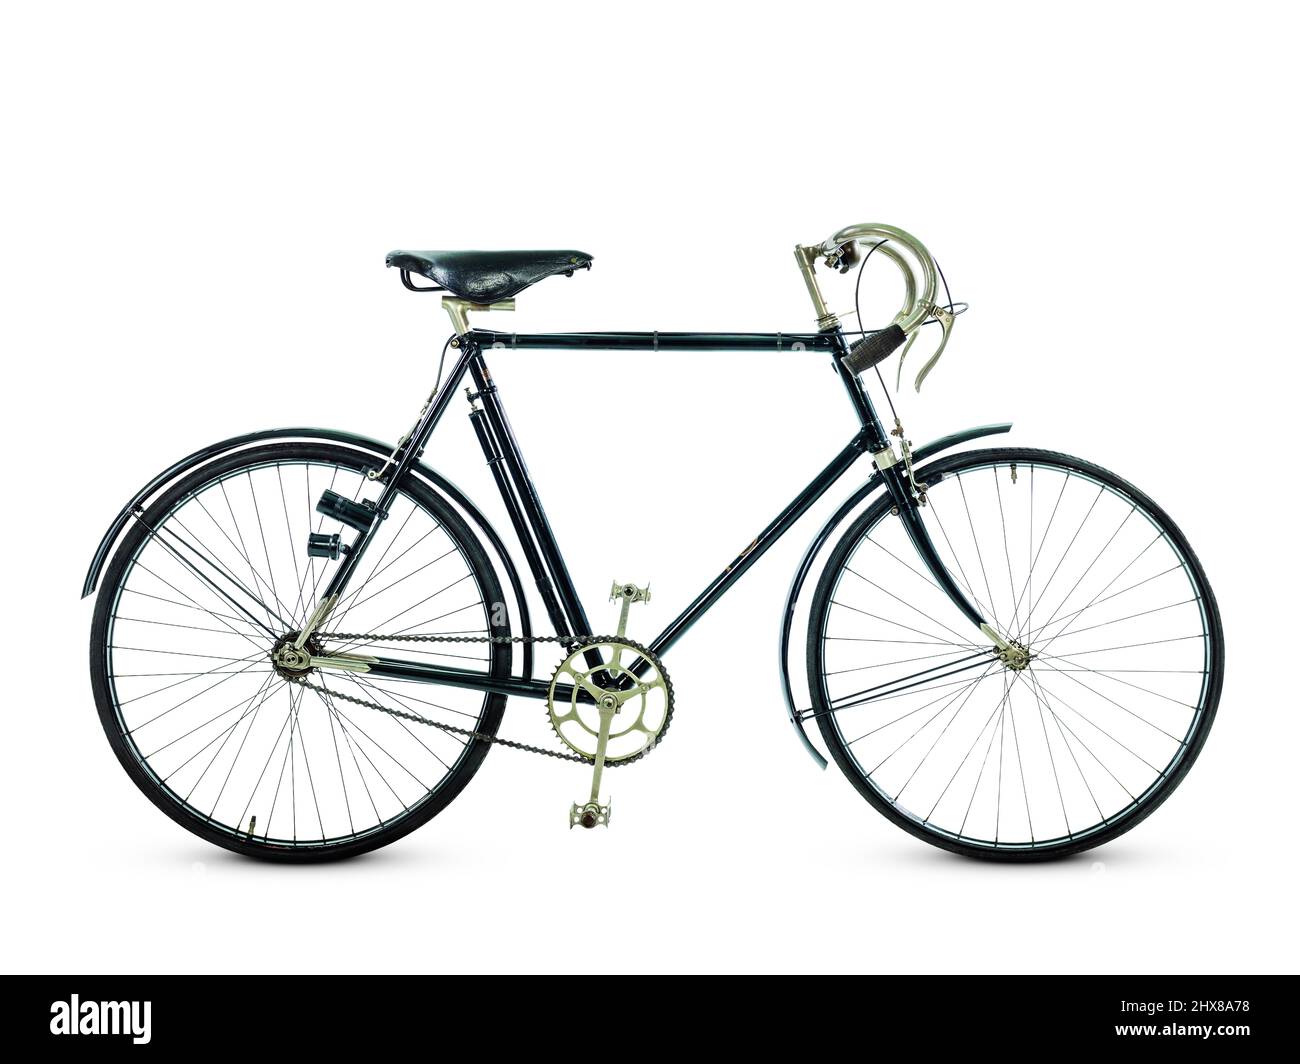 Chater lea sports, 1928, UK, Side view. London cycle co set up in 1890s. Company known earlier for  building  the whippet. London Cycle Co. known for excellent fittings that outlasted its cycles and were in the end too expensive to complete after mid 1920 Stock Photo